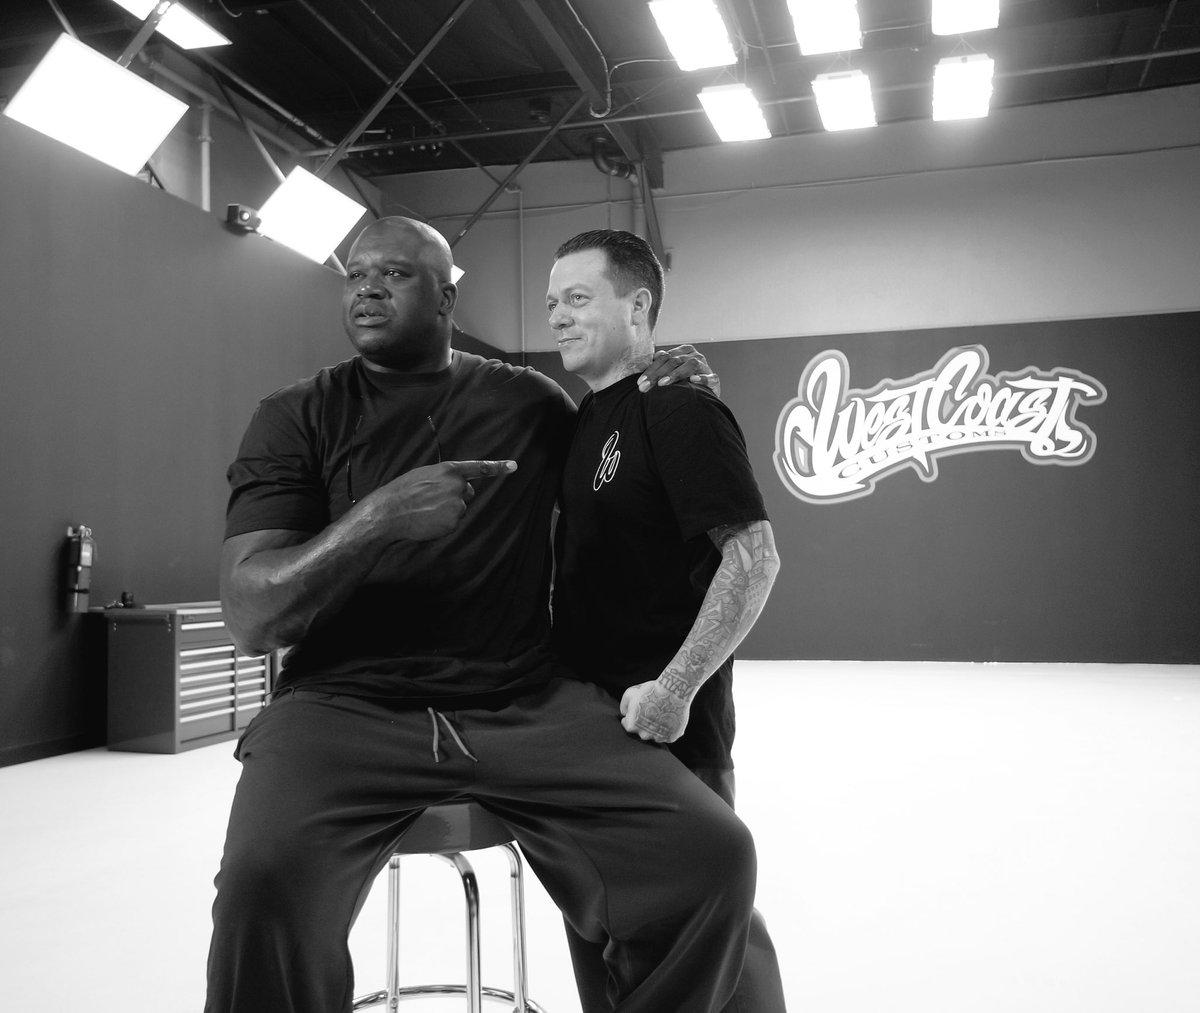 RT @officialwcc: Big #HappyBirthday to our friend and long-time client, @SHAQ! ???????? #Shaq x #WestCoastCustoms https://t.co/kKoTPdHWV0